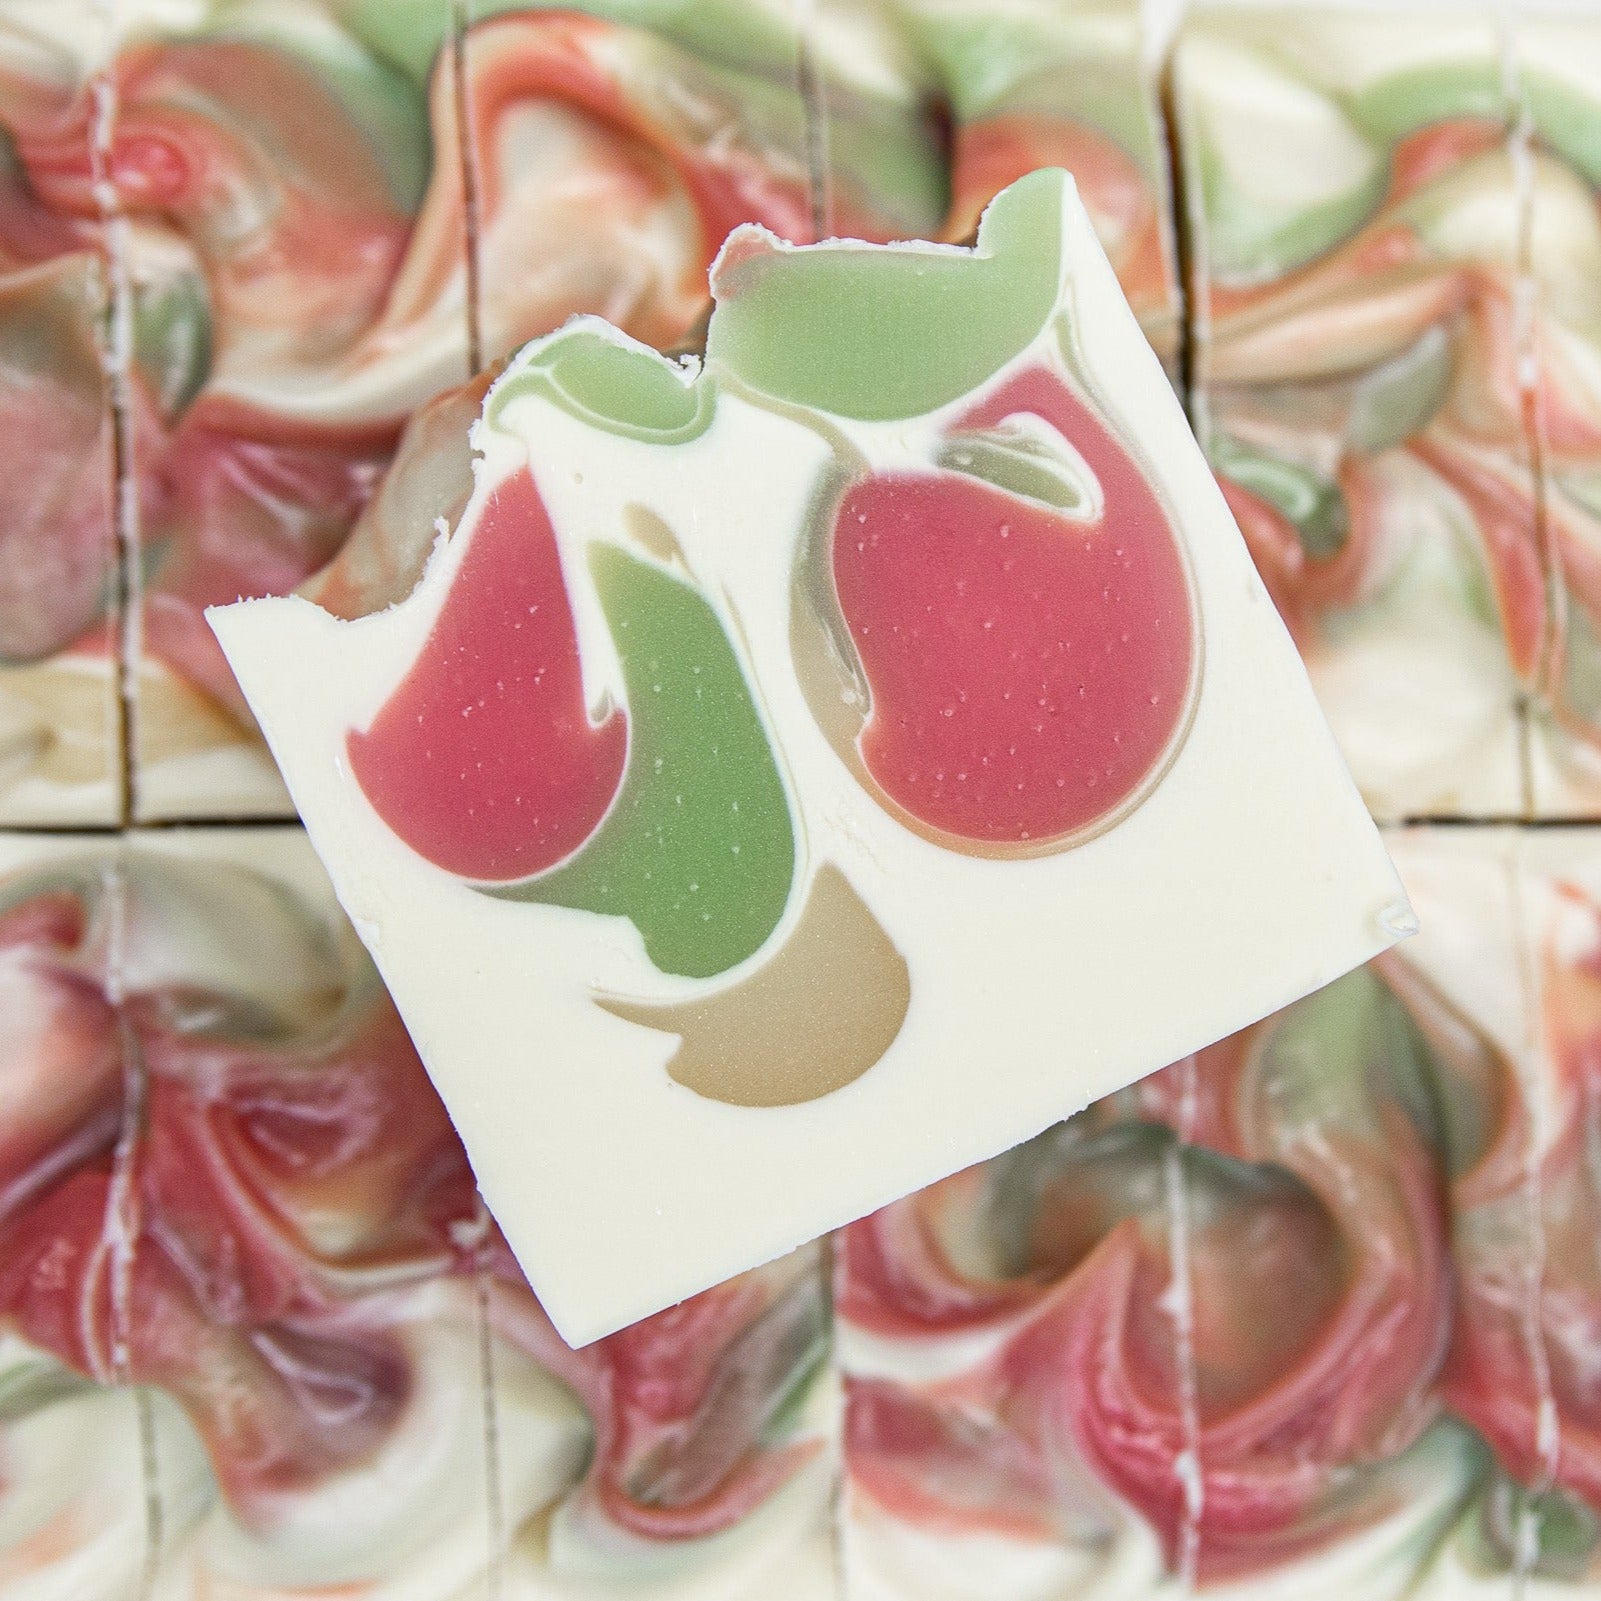 One bar of Apple Sage soap laying on the top of two rows of Apple Sage soap. Apple Sage is an off-white soap with a pink-red, green, and yellow drop swirl design.